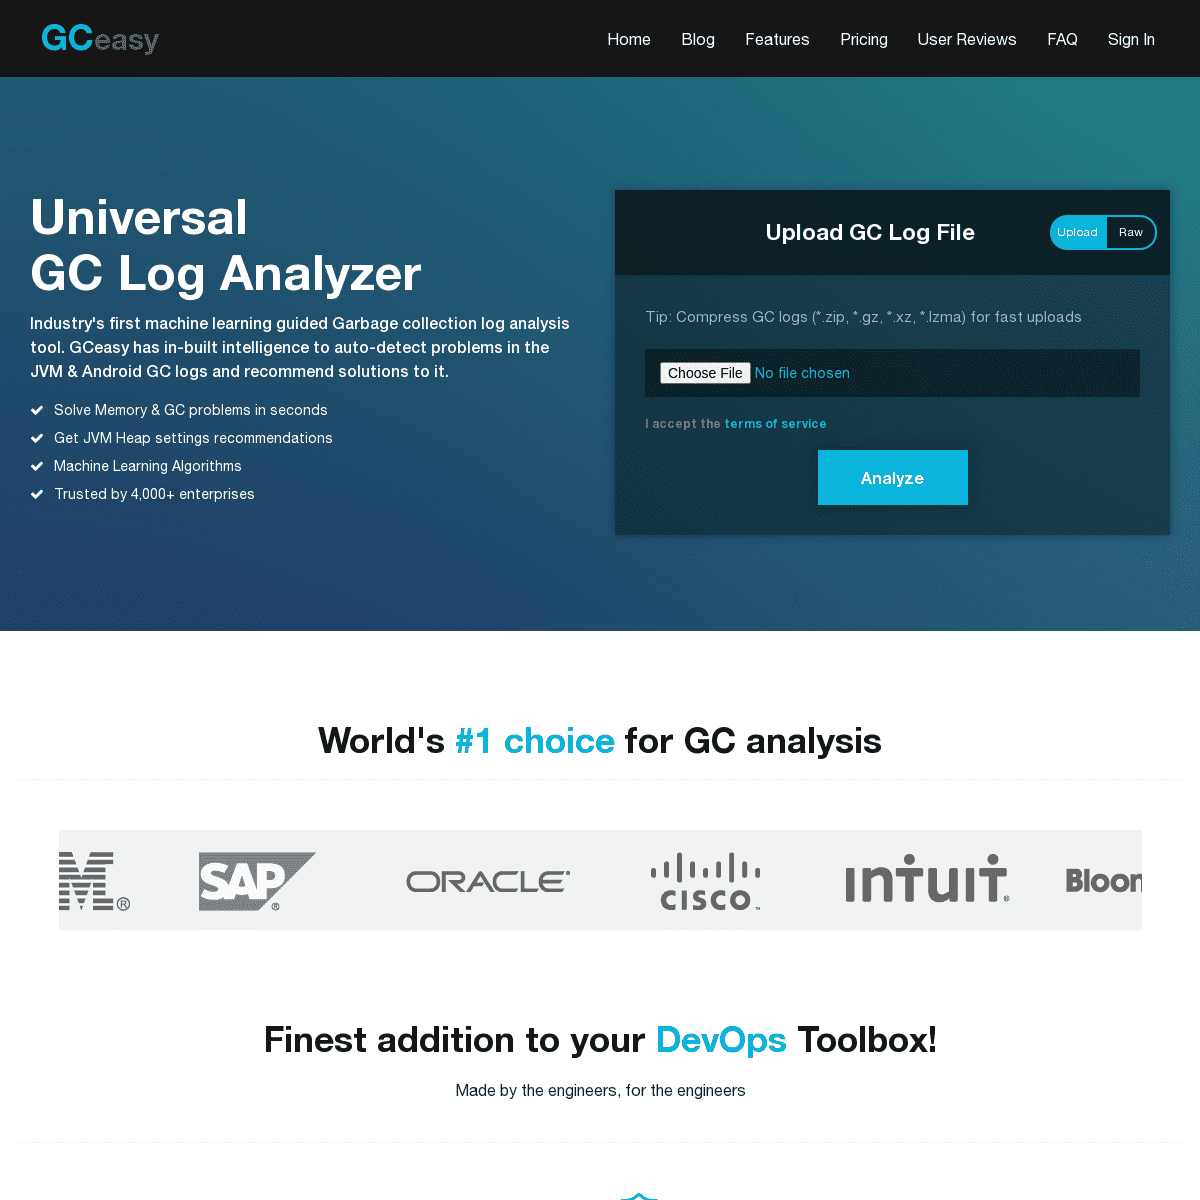 A complete backup of https://gceasy.io